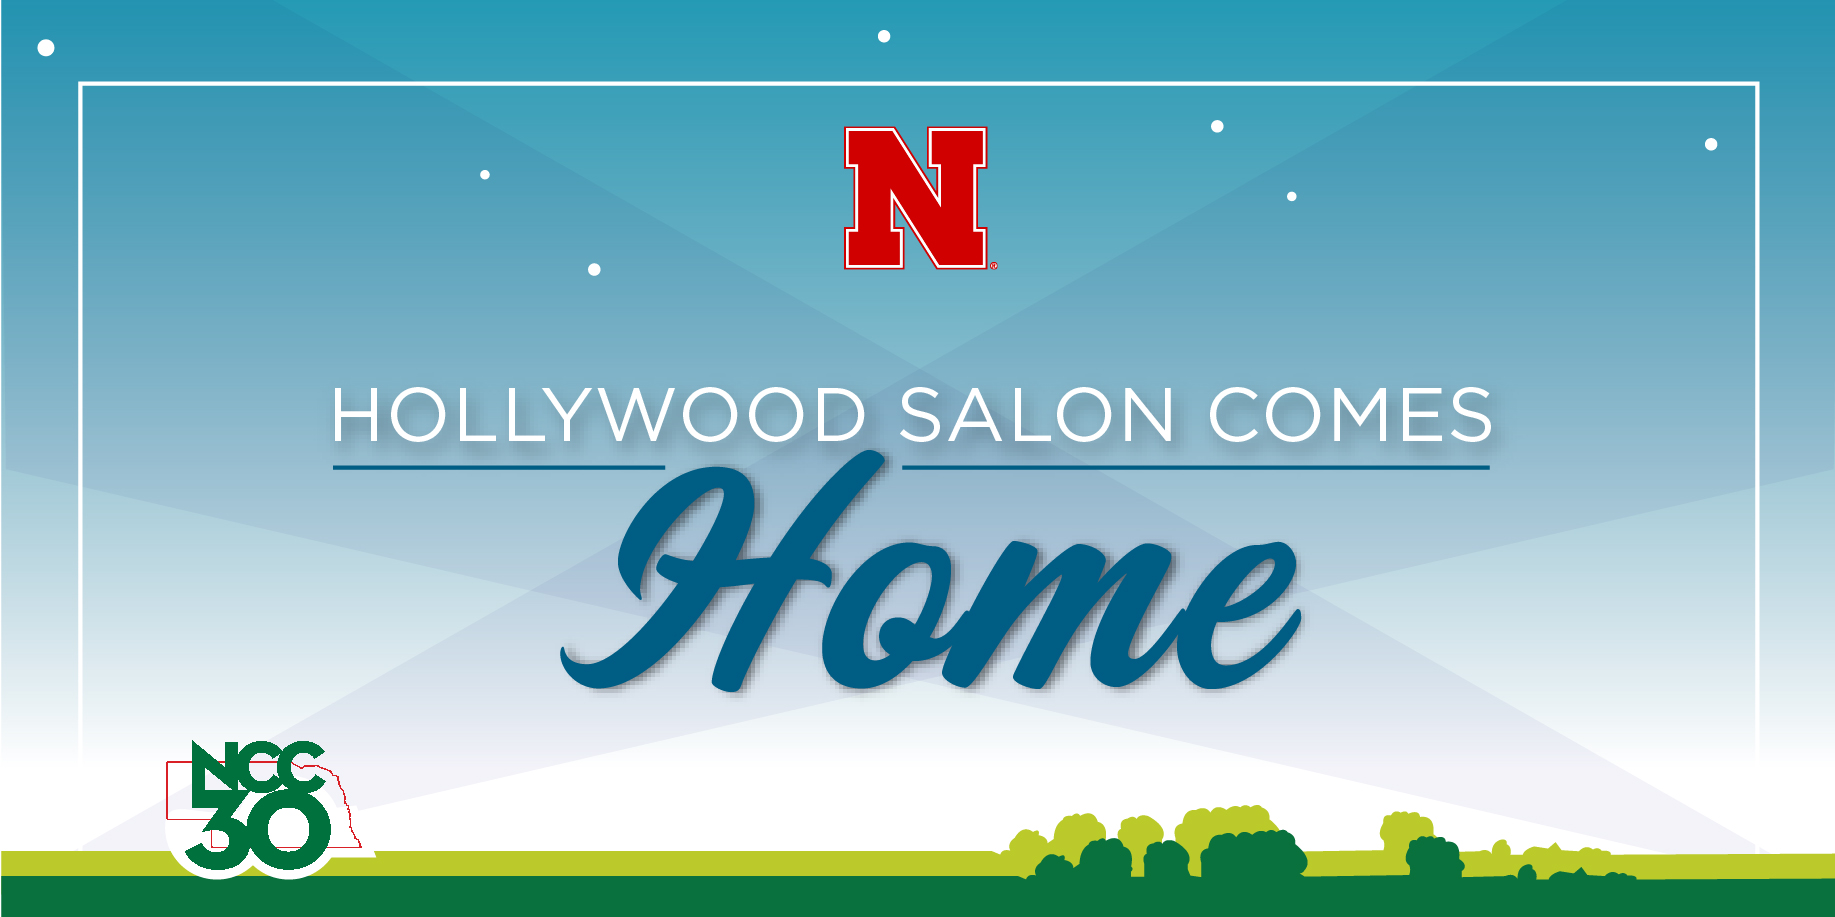 ska Coast Connection presents The Hollywood Salon Comes Home on Monday, May 8 at the Johnny Carson Center for Emerging Media Arts. 